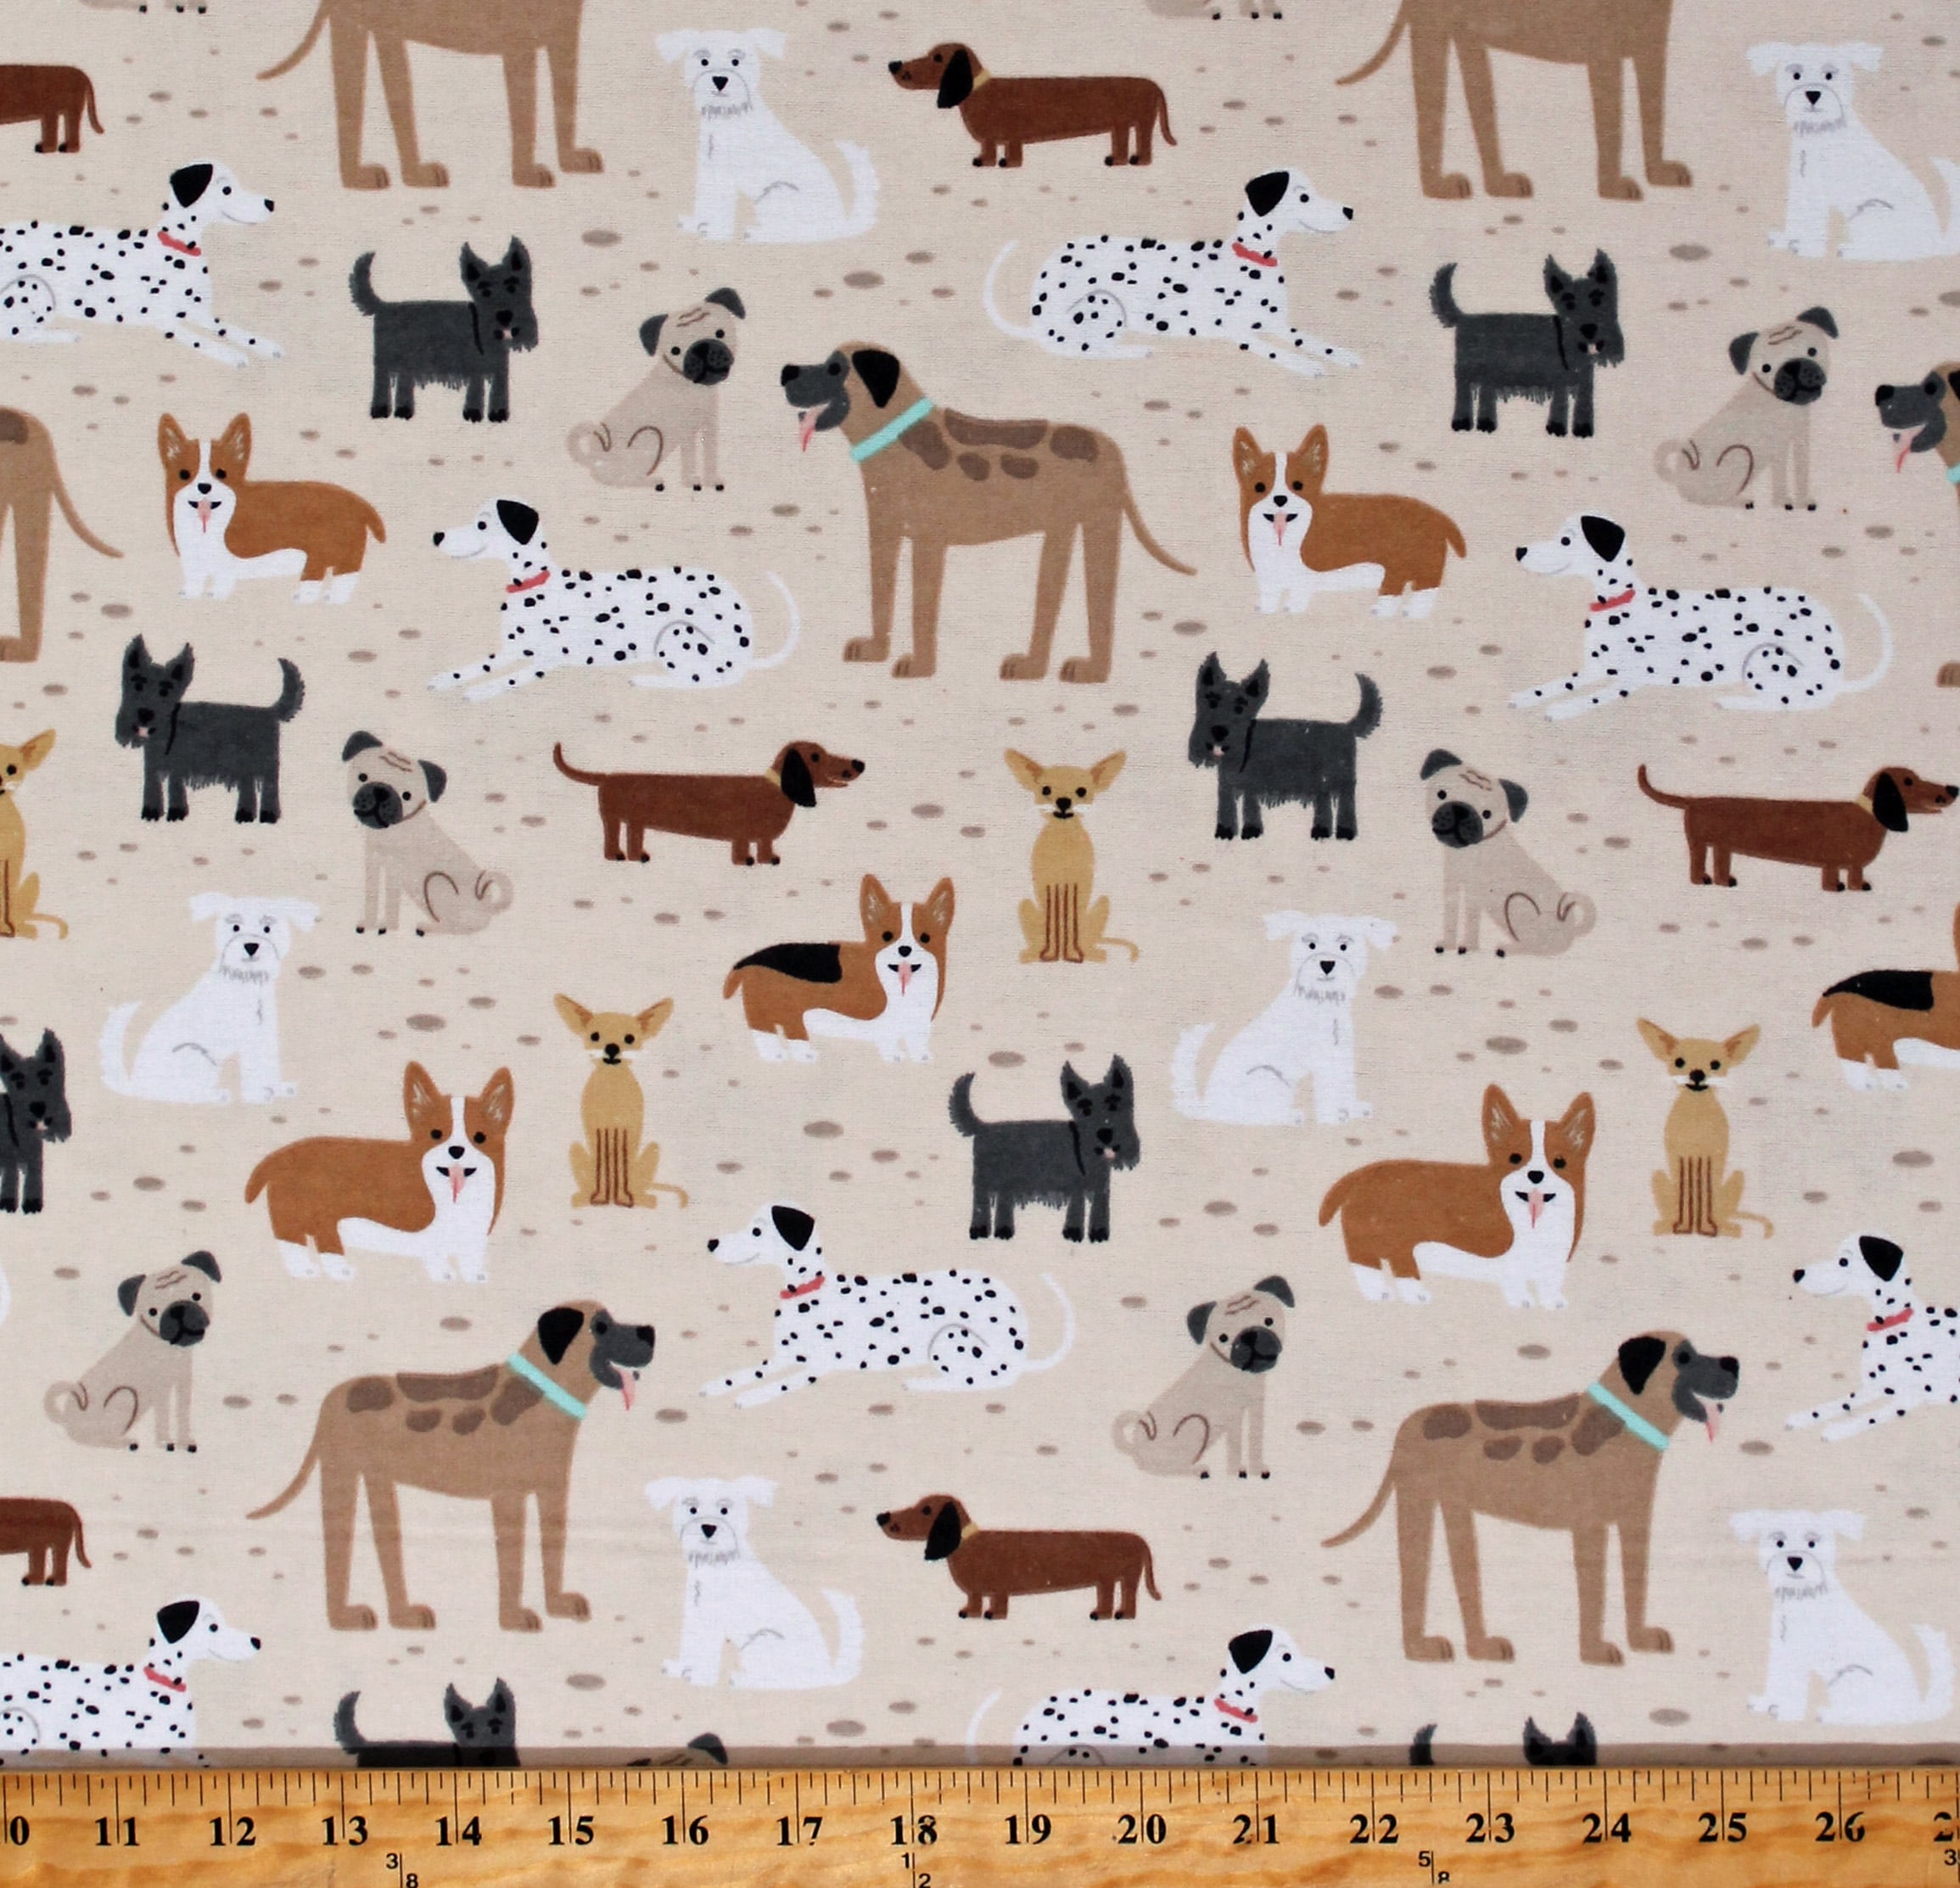 Flannel Dogs Dog Breeds Animals Pets Puppy Puppies Kids Children's Cotton  Flannel Fabric Print by the Yard (N-1023-44) 